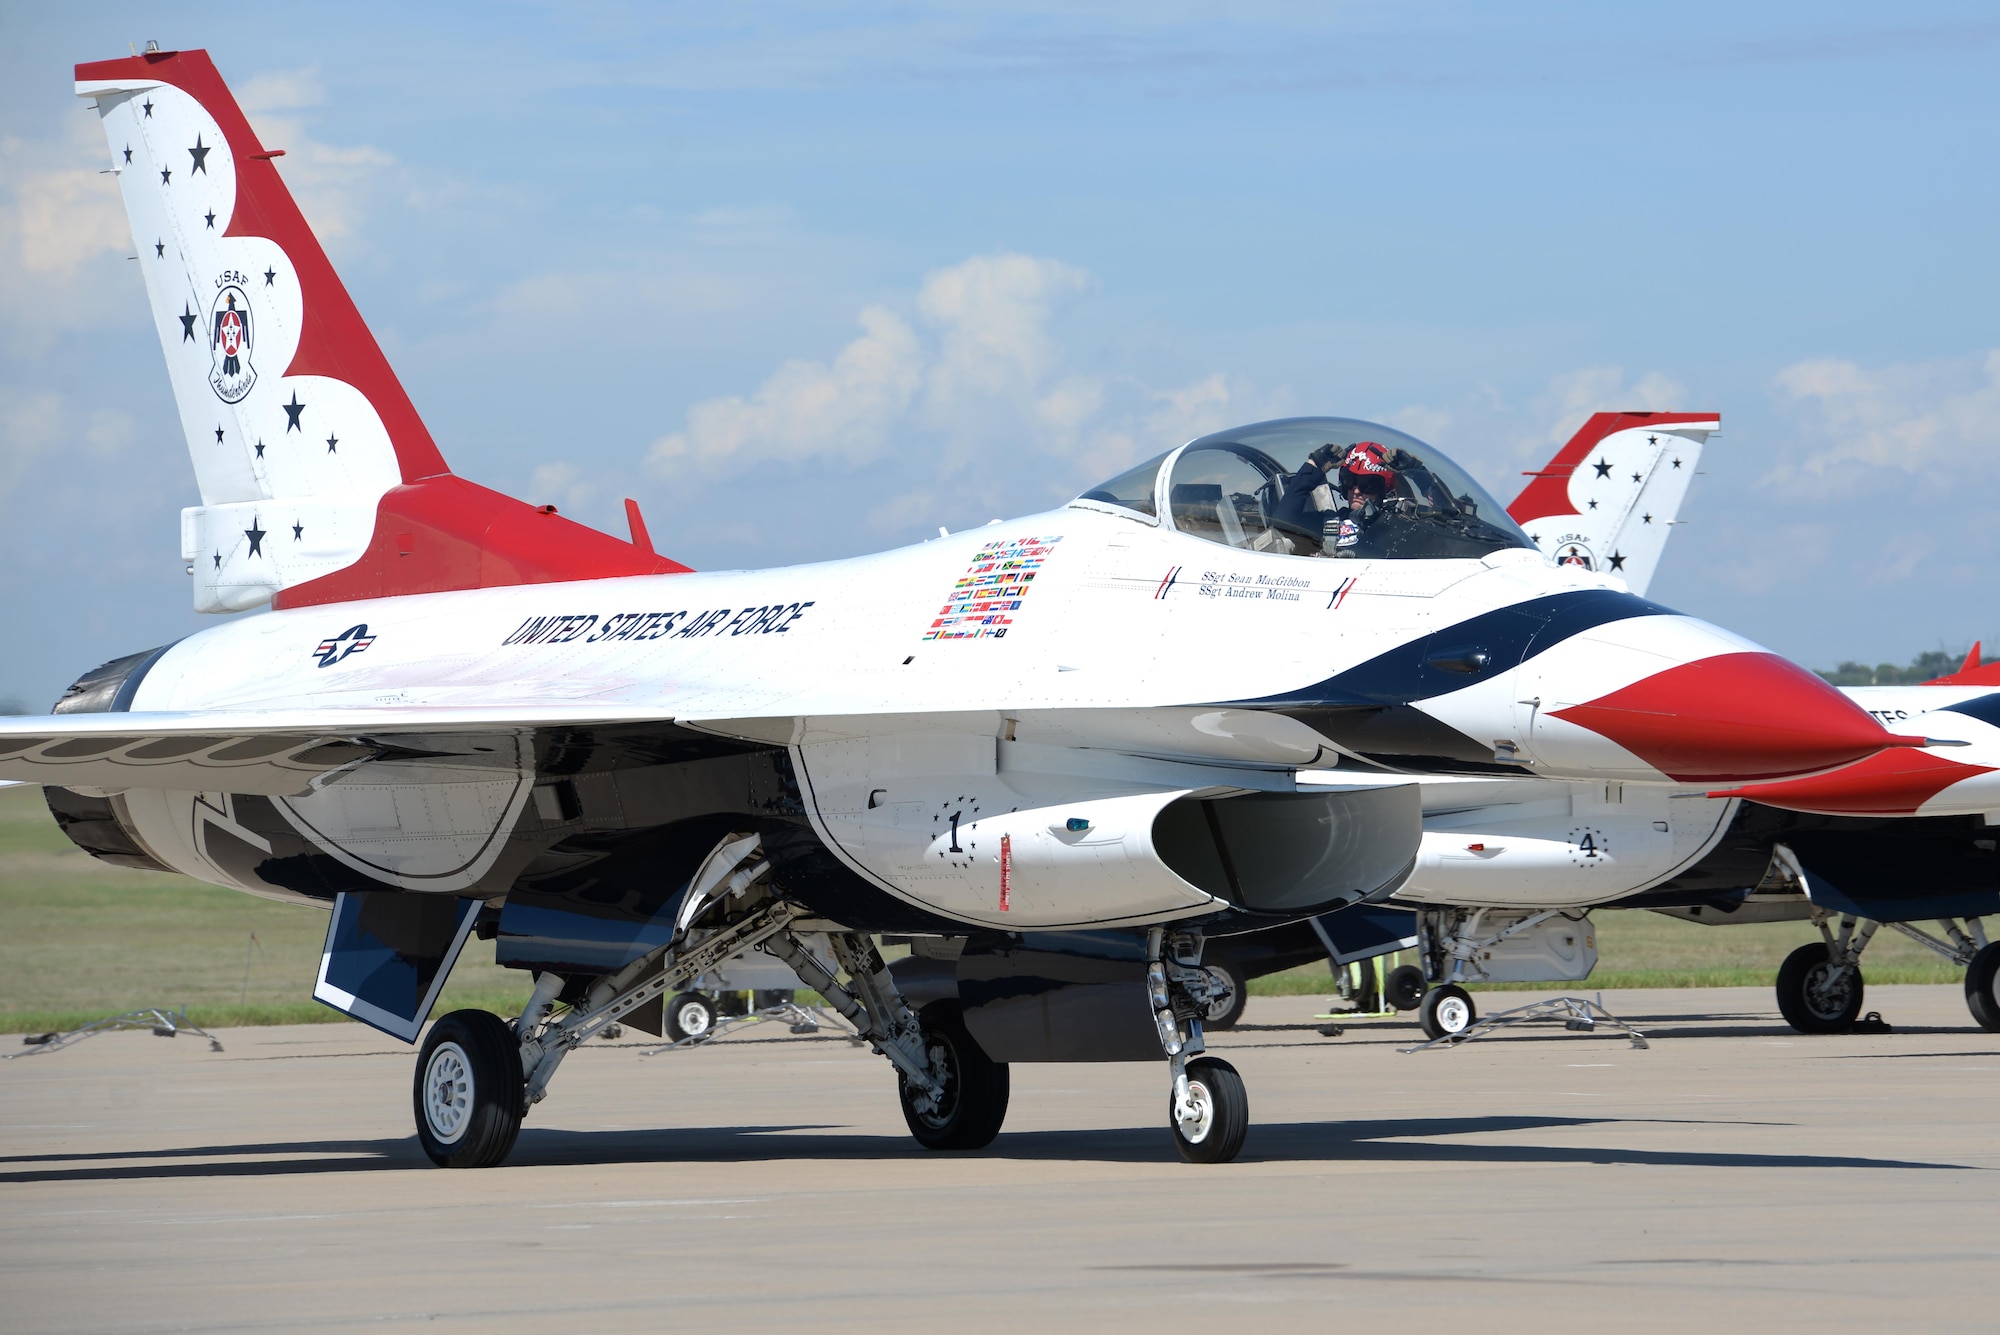 U.S. Air Force Thunderbird Commander, Lt. Col. Christopher Hammond, waves as he taxis for take-off on Sheppard Air Force Base, Texas, Sept. 17, 2016. Hammond and his team of Thunderbirds performed various aerial acrobatic demonstrations for Sheppard’s 75th Anniversary Air Show Celebration. (U.S. Air Force photo by Senior Airman Kyle E. Gese)